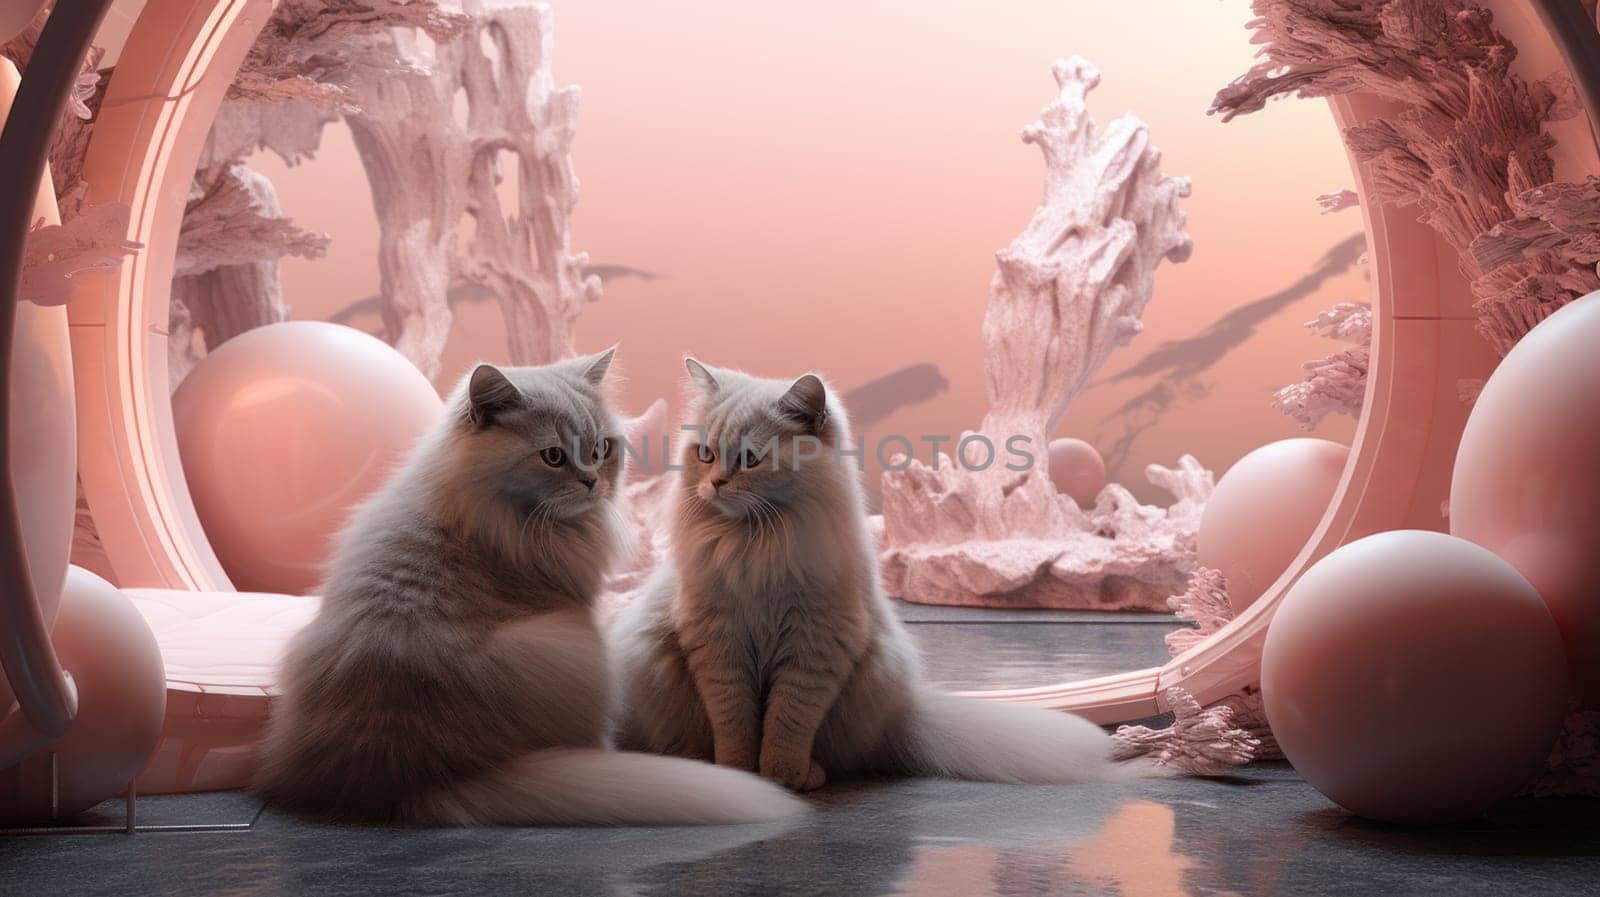 Two cats are sitting on a pink background with balloons, AI by starush